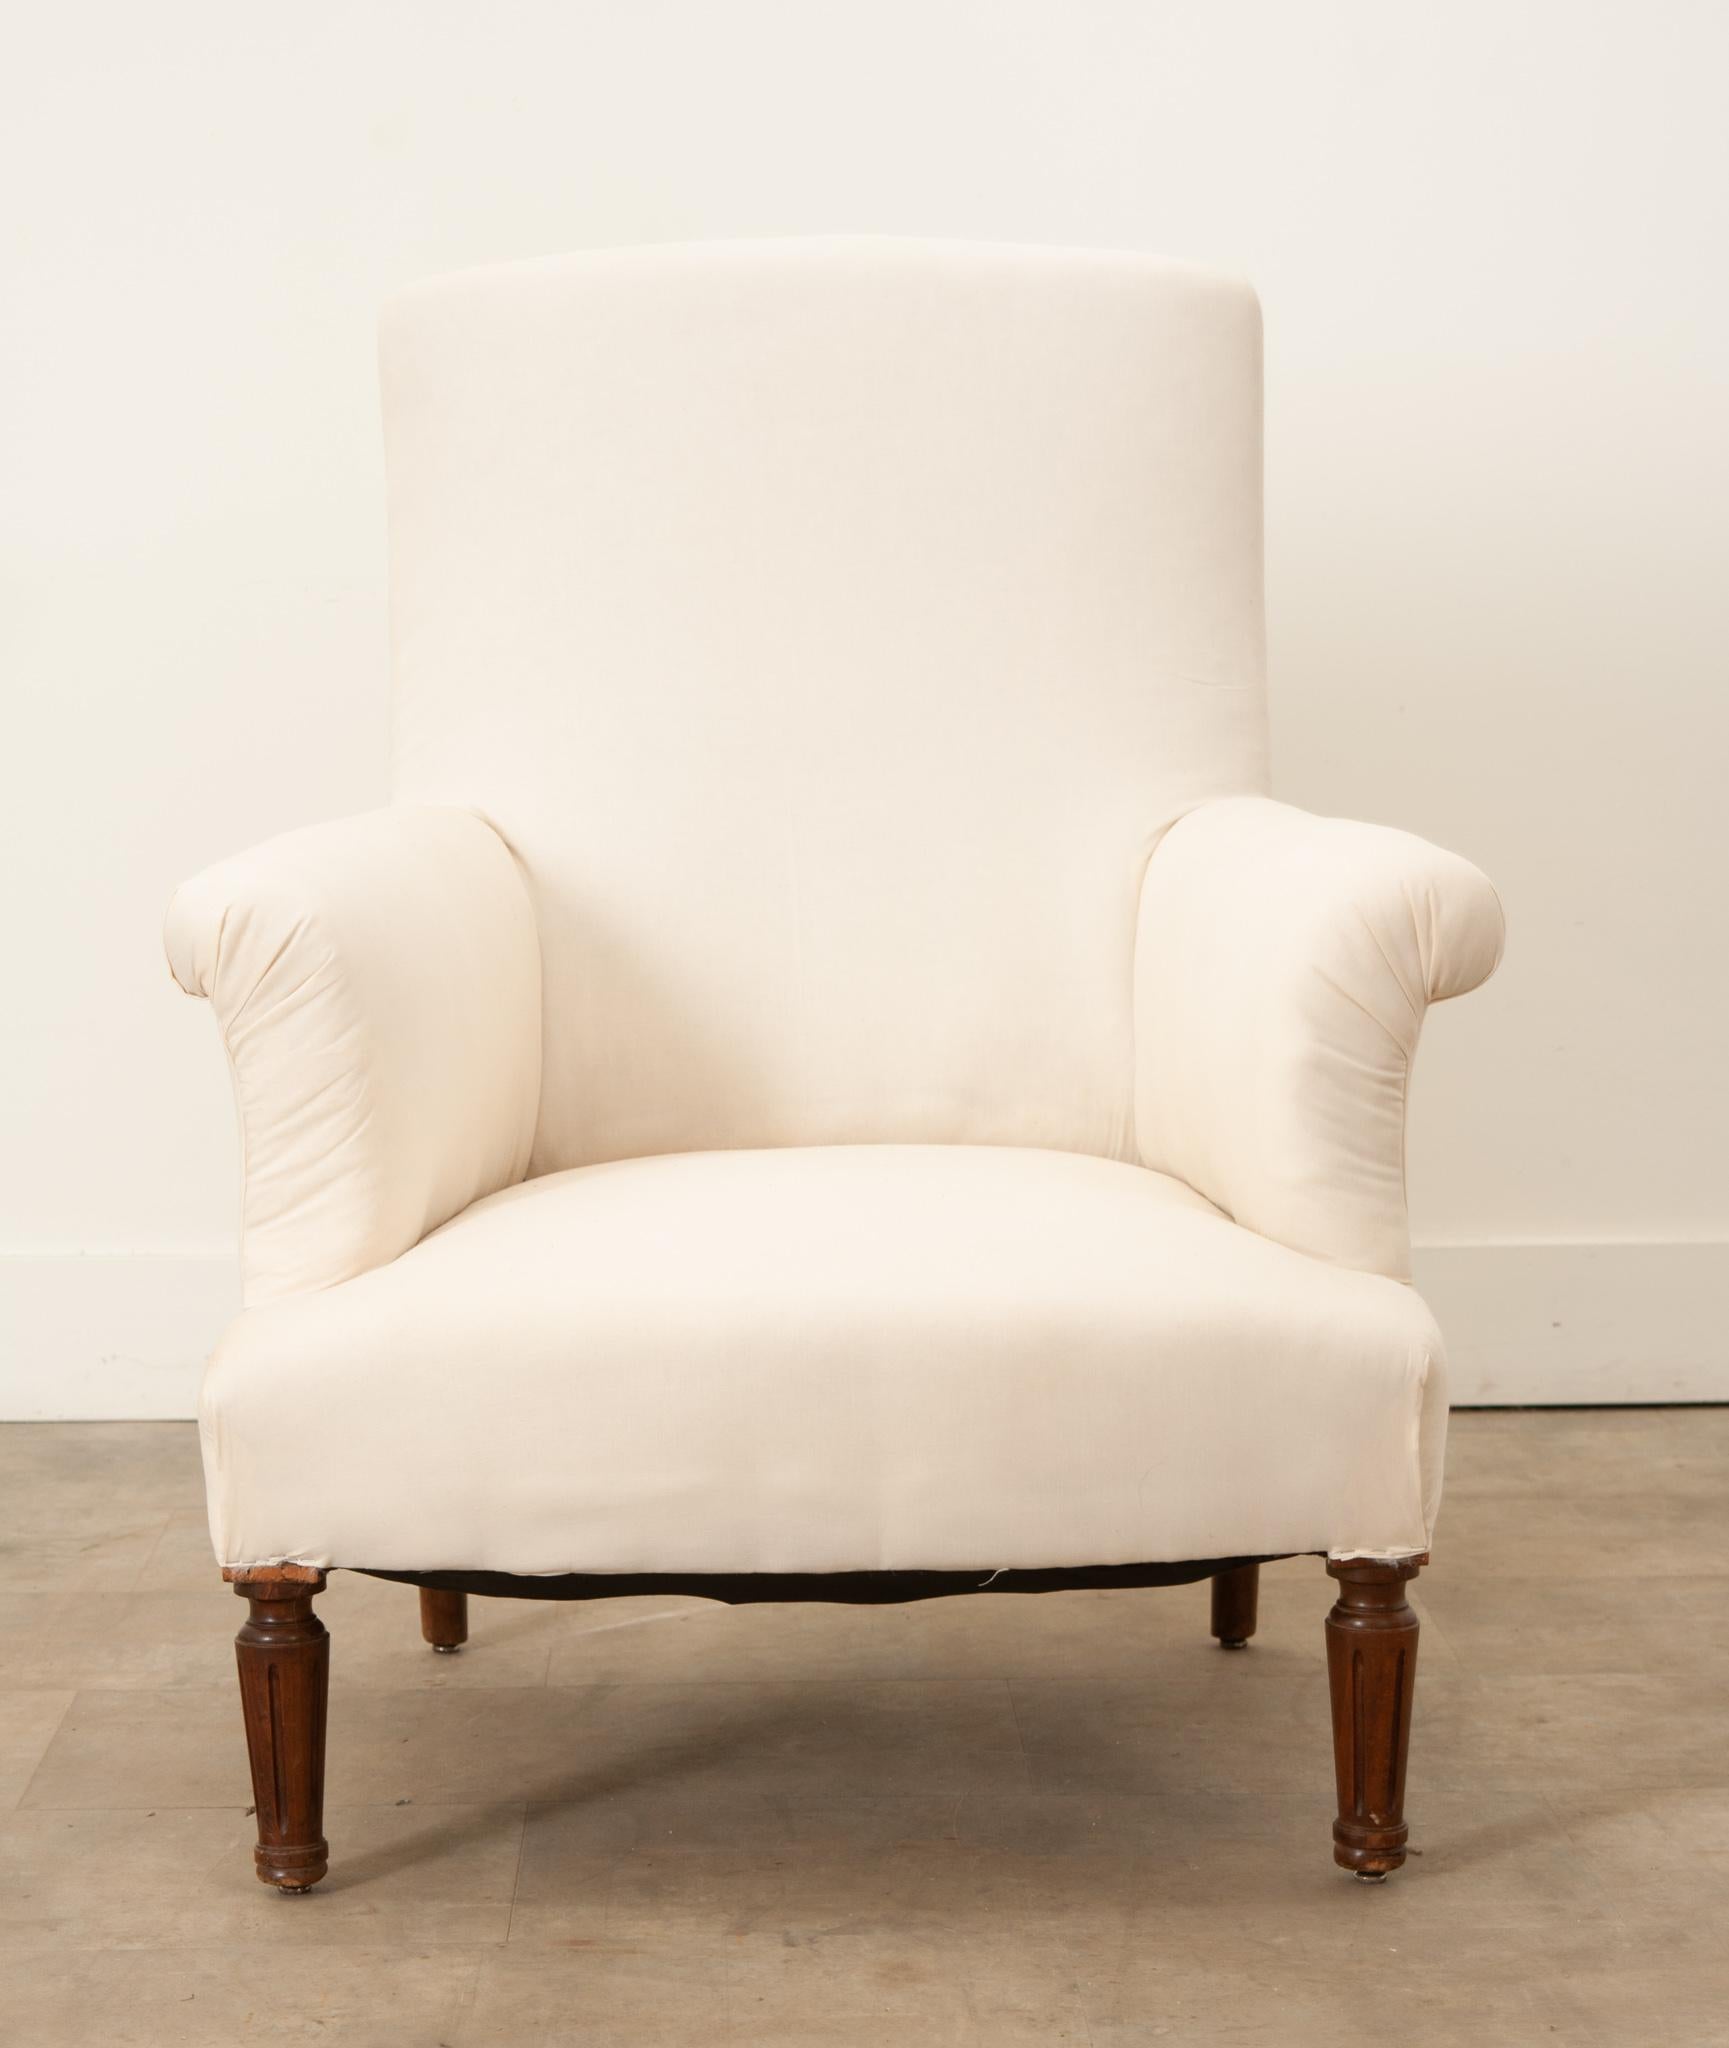 This handsome armchair was crafted in 19th century France from solid oak and recently upholstered in a creamy ivory fabric.The fabric is tightly secured to the frame with staples and is ready for new upholstery that pairs with your interior or a